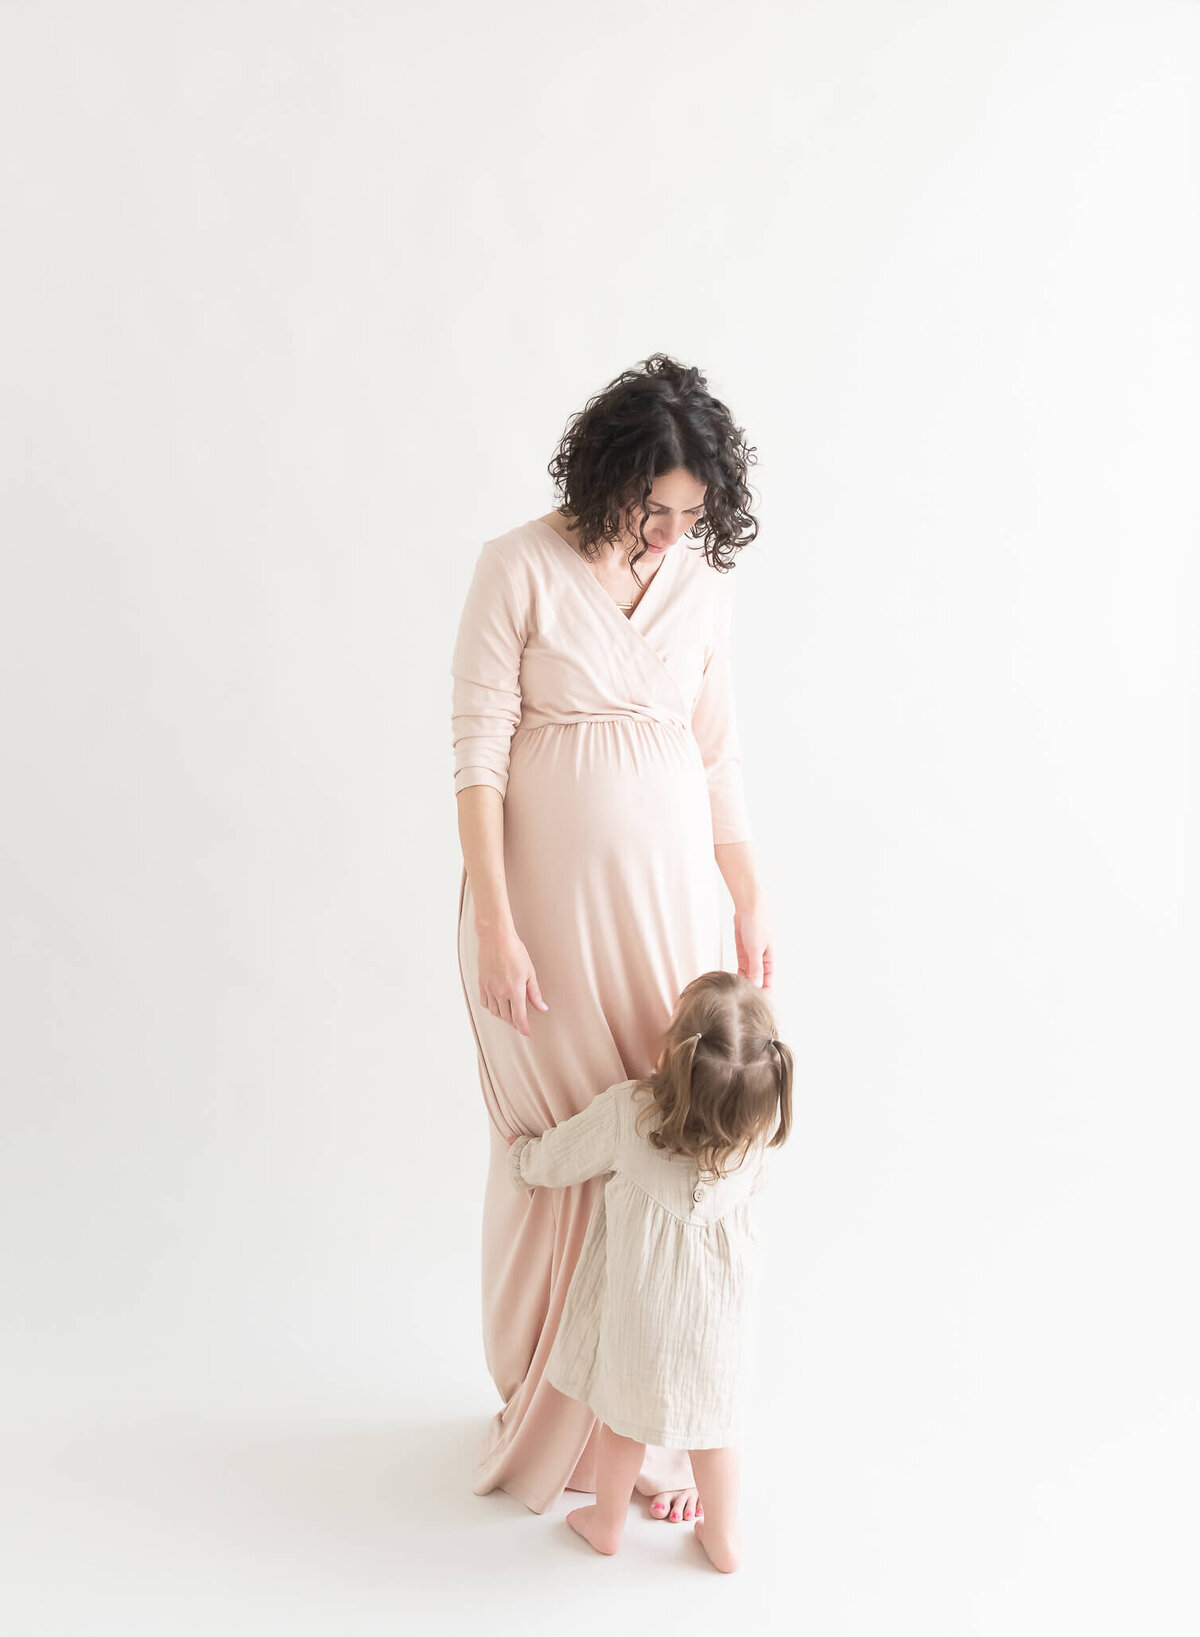 studio maternity portrait with mom looking down at toddler daughter holding her legs